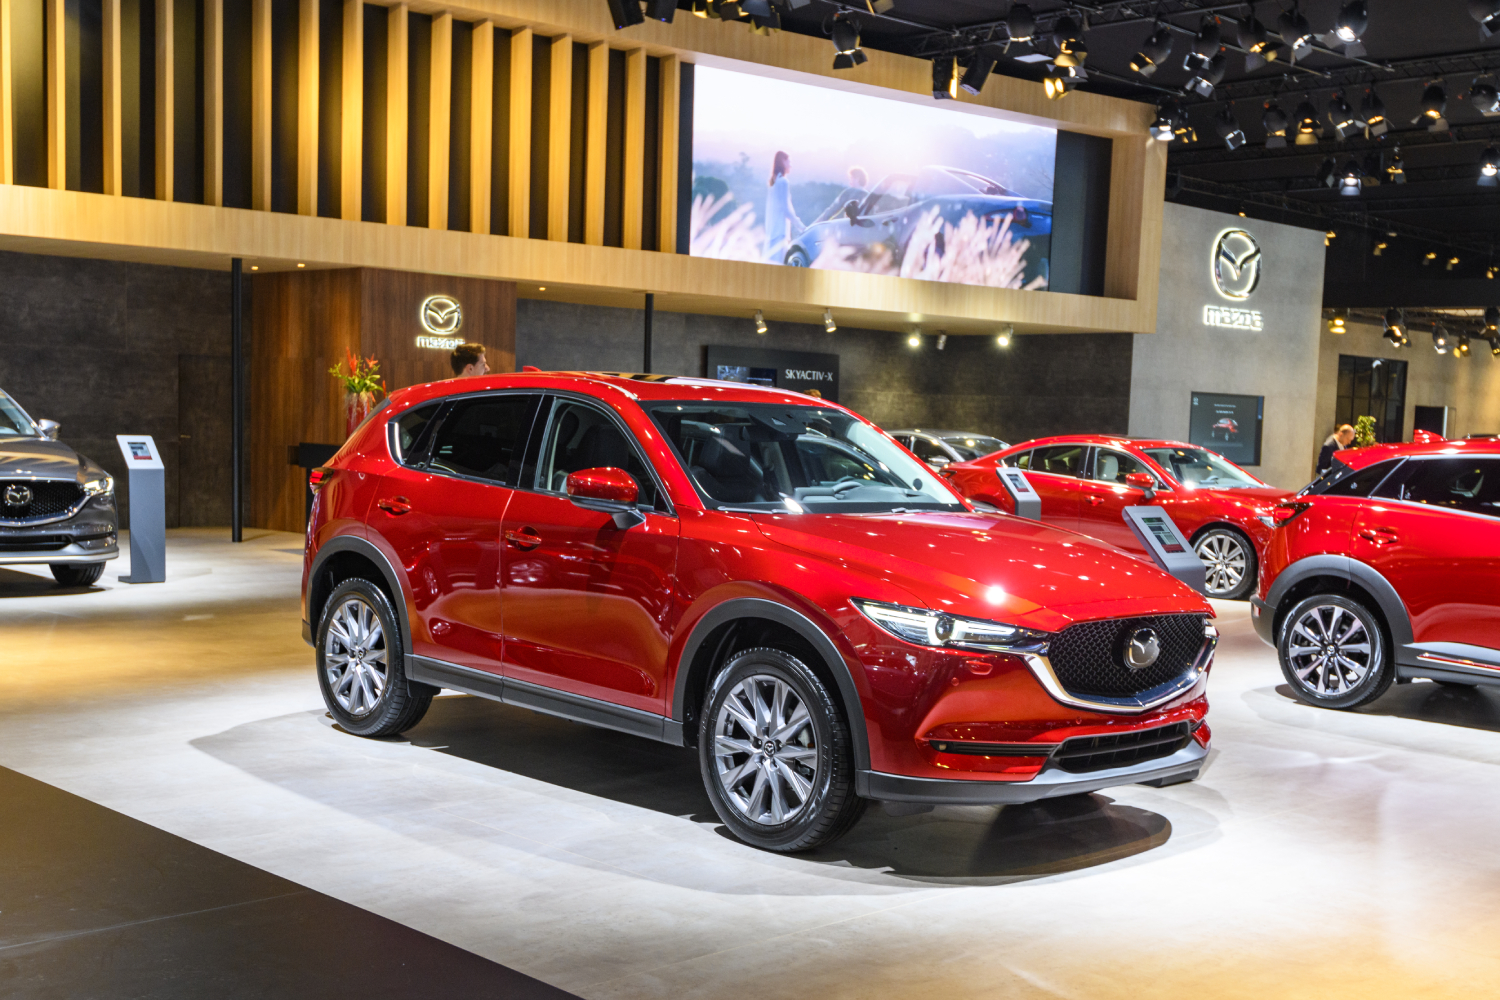 A red Mazda CX-5 SUV on display